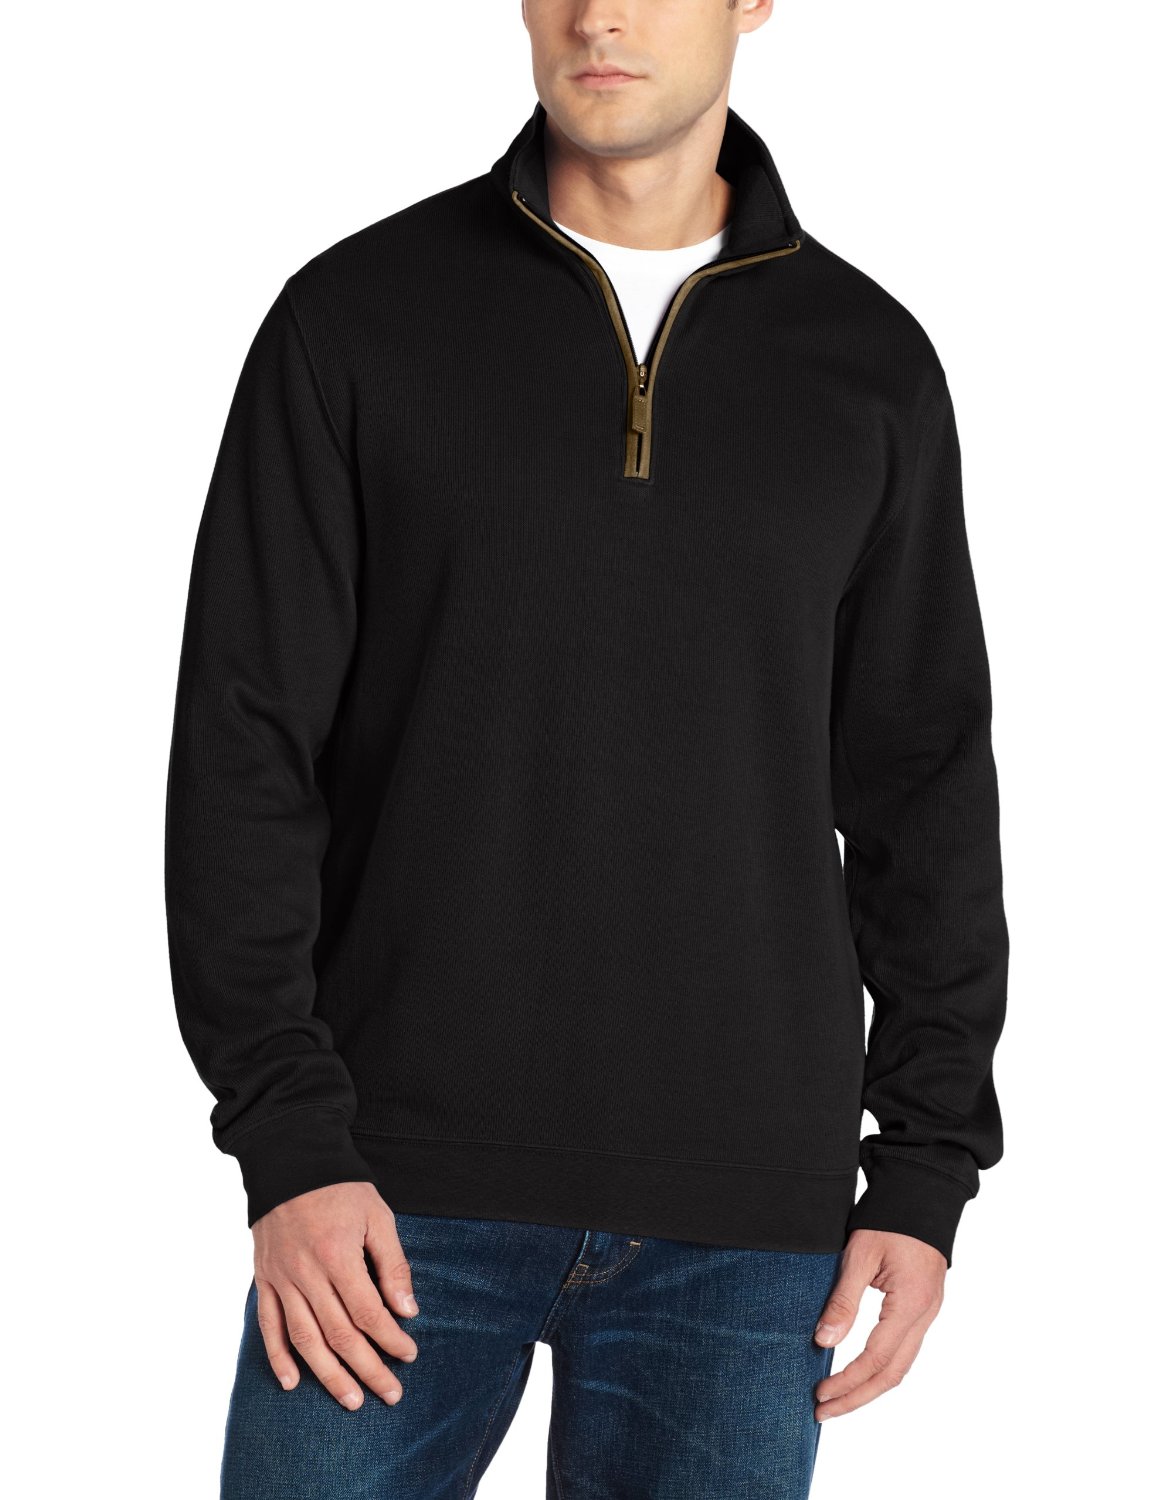 Greg Norman Mens Collection Contemporary Mock Pullovers